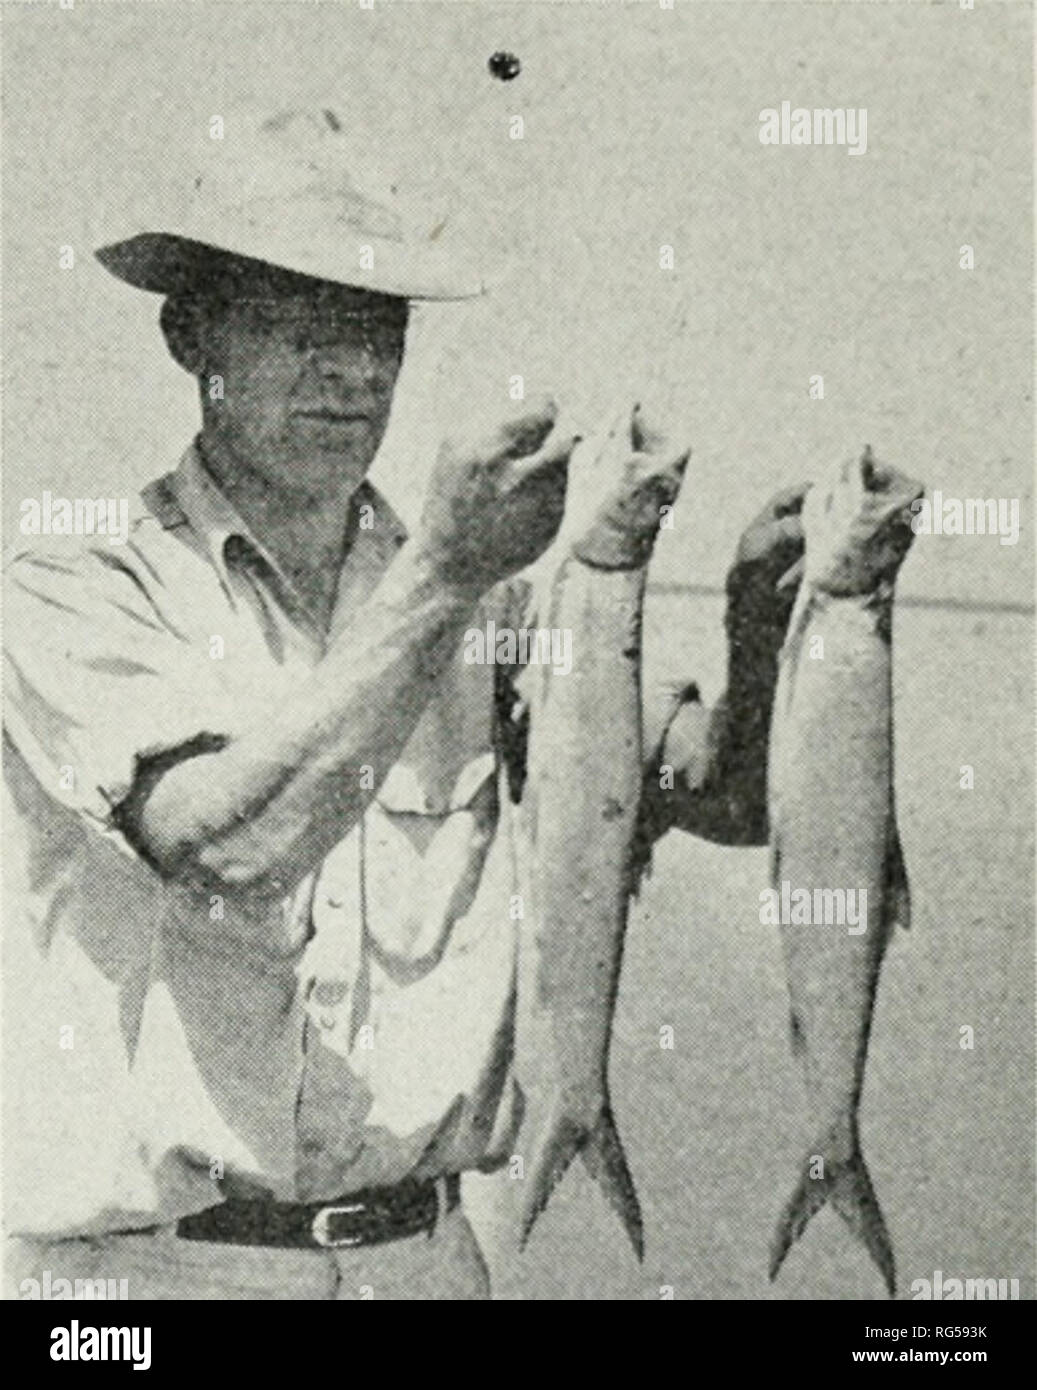 . California fish and game. Fisheries -- California; Game and game-birds -- California; Fishes -- California; Animal Population Groups; PÃªches; Gibier; Poissons. A GAME FISH FOR THE SALTON SEA, THE TEN- POUNDER, Elops affinis' By William A. Dill and Chester Woodhull Bureau of Fish Conservation California Division of Fish arid Game Two hundred and forty-four feet below sea level in southern California lies the Salton Sea, whose saline waters, 40 miles long and 12 miles wide, sparkle beneath the desert sun. Swimming, boating and some waterfowl shooting attract sportsmen to its shores. But to th Stock Photo